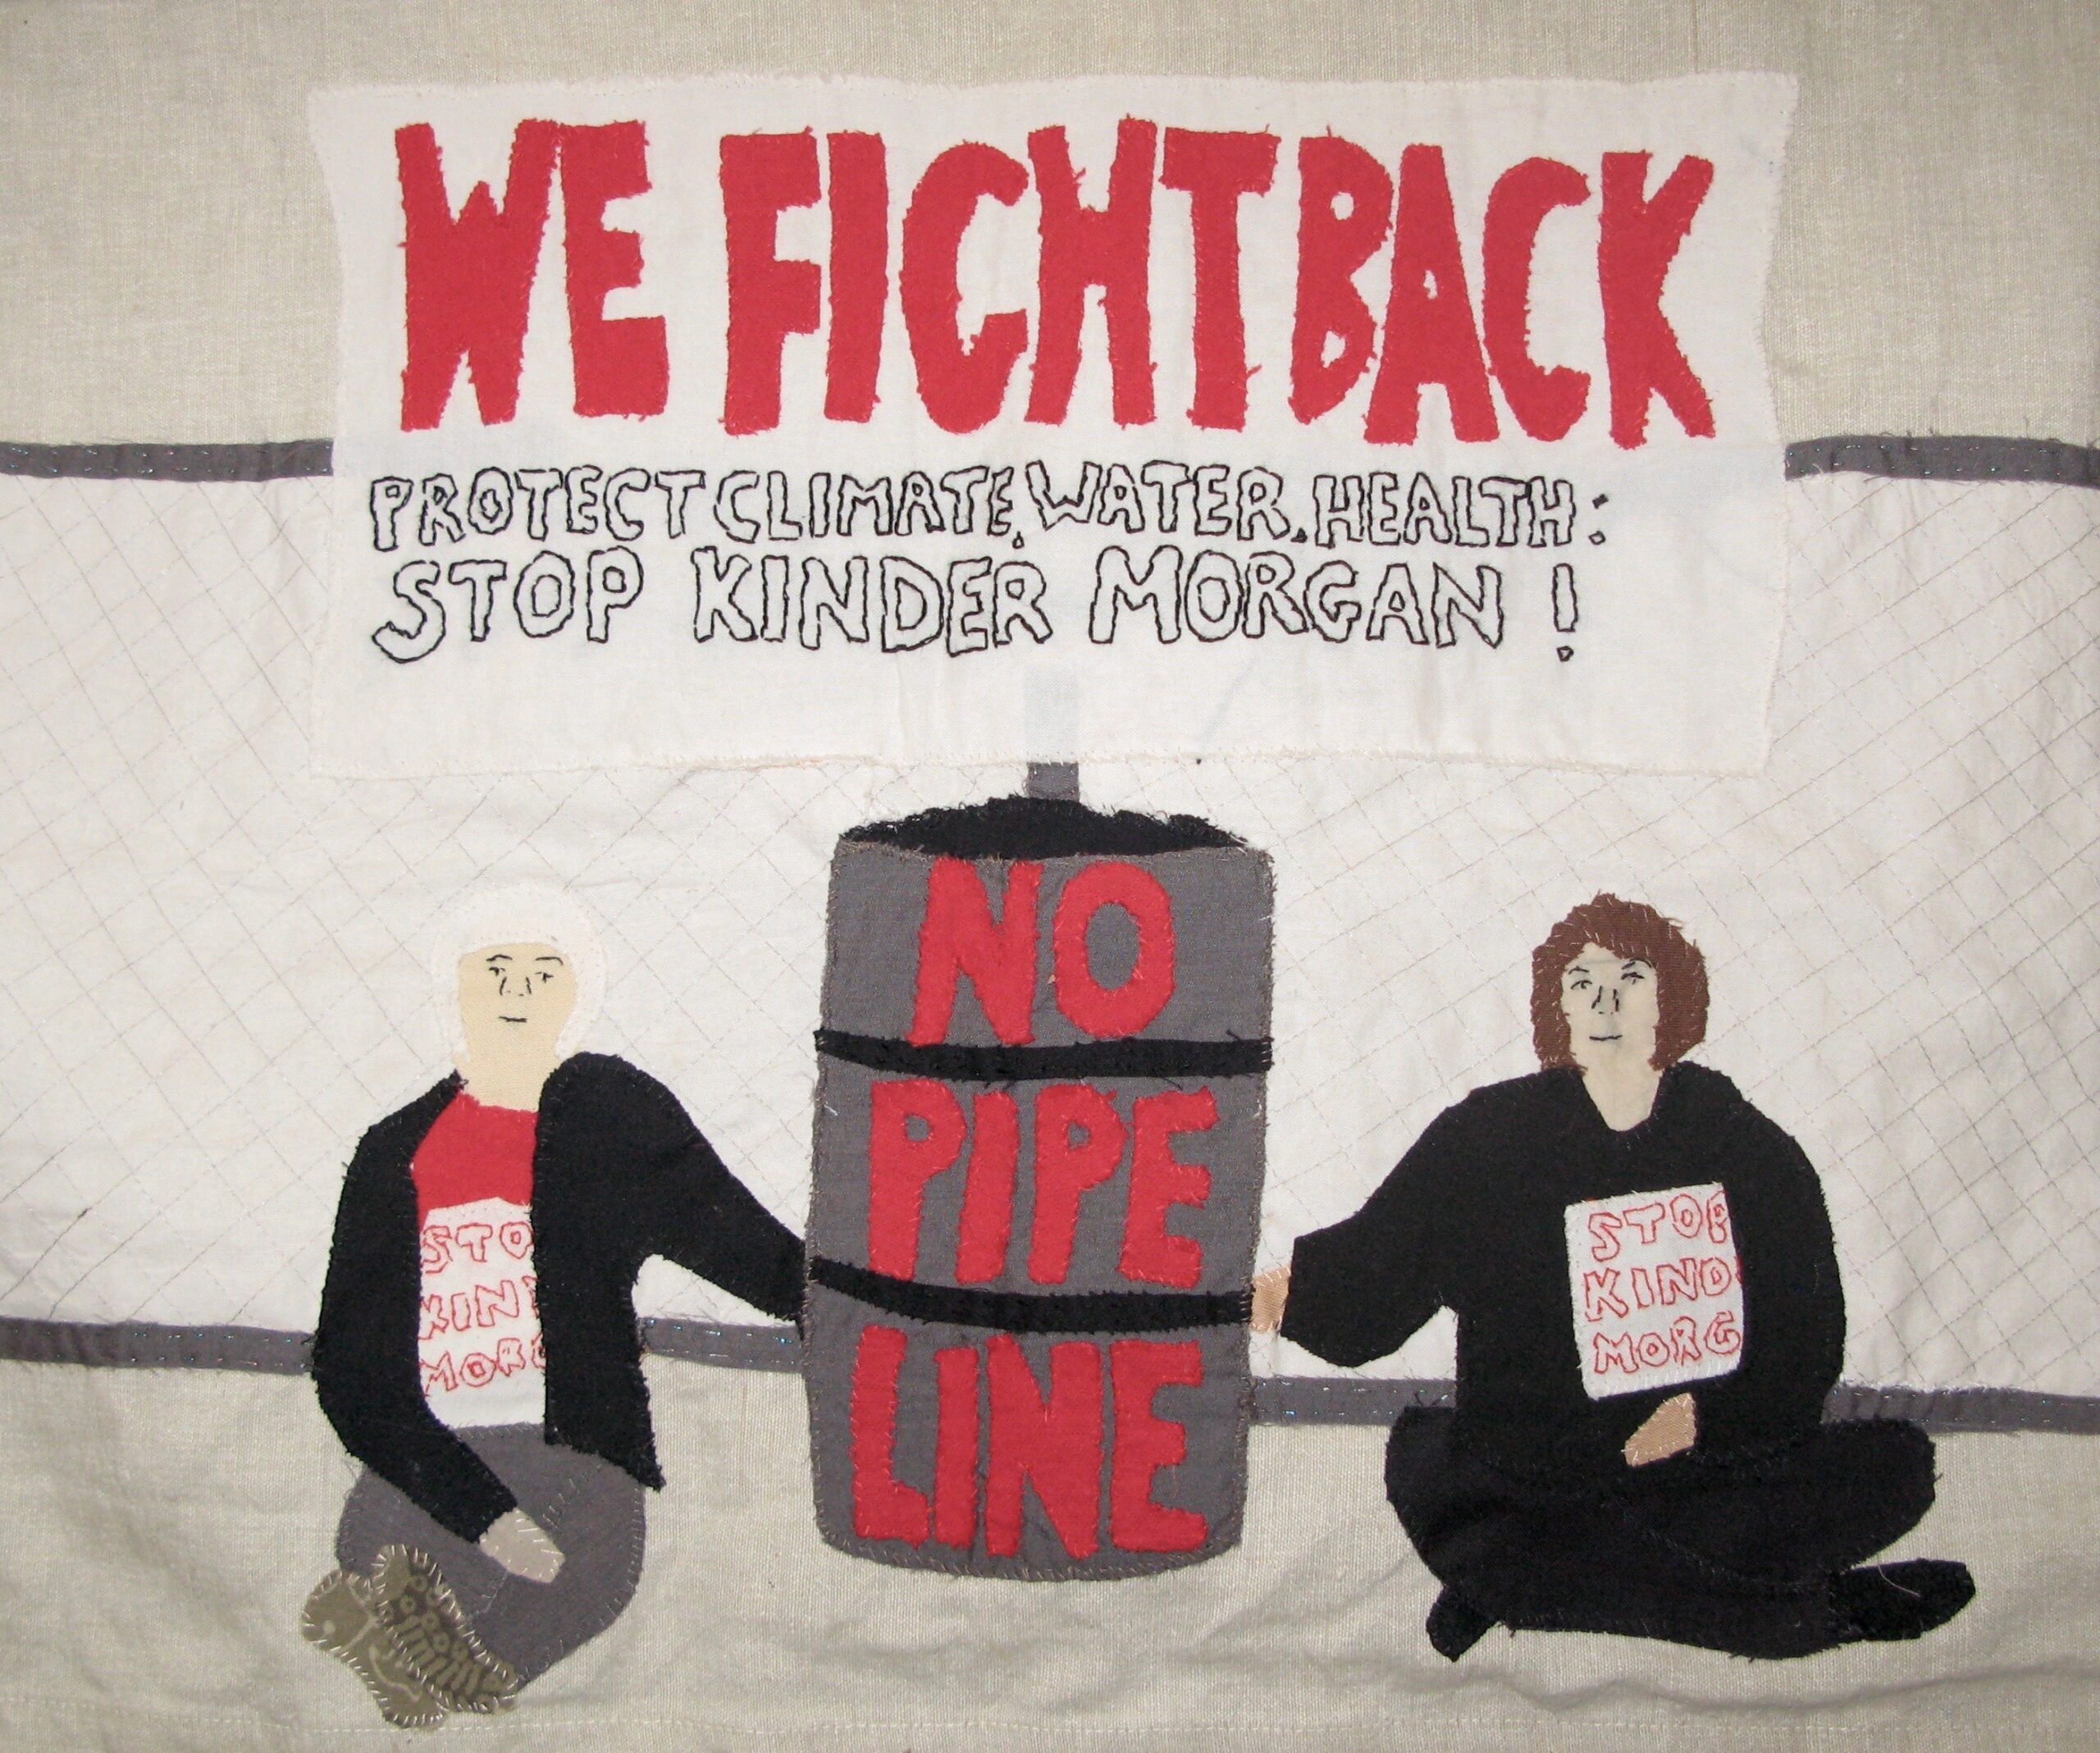 Two women are sitting on the ground in front of a chain link fence. They are both wearing shirts that say "Stop Kinder Morgan" and their hands are chained to the fence behind a barrel that says "No Pipe Line". Above them is a banner that reads: "We Fight Back. Protect Climate, Water, Health: Stop Kinder Morgan !"